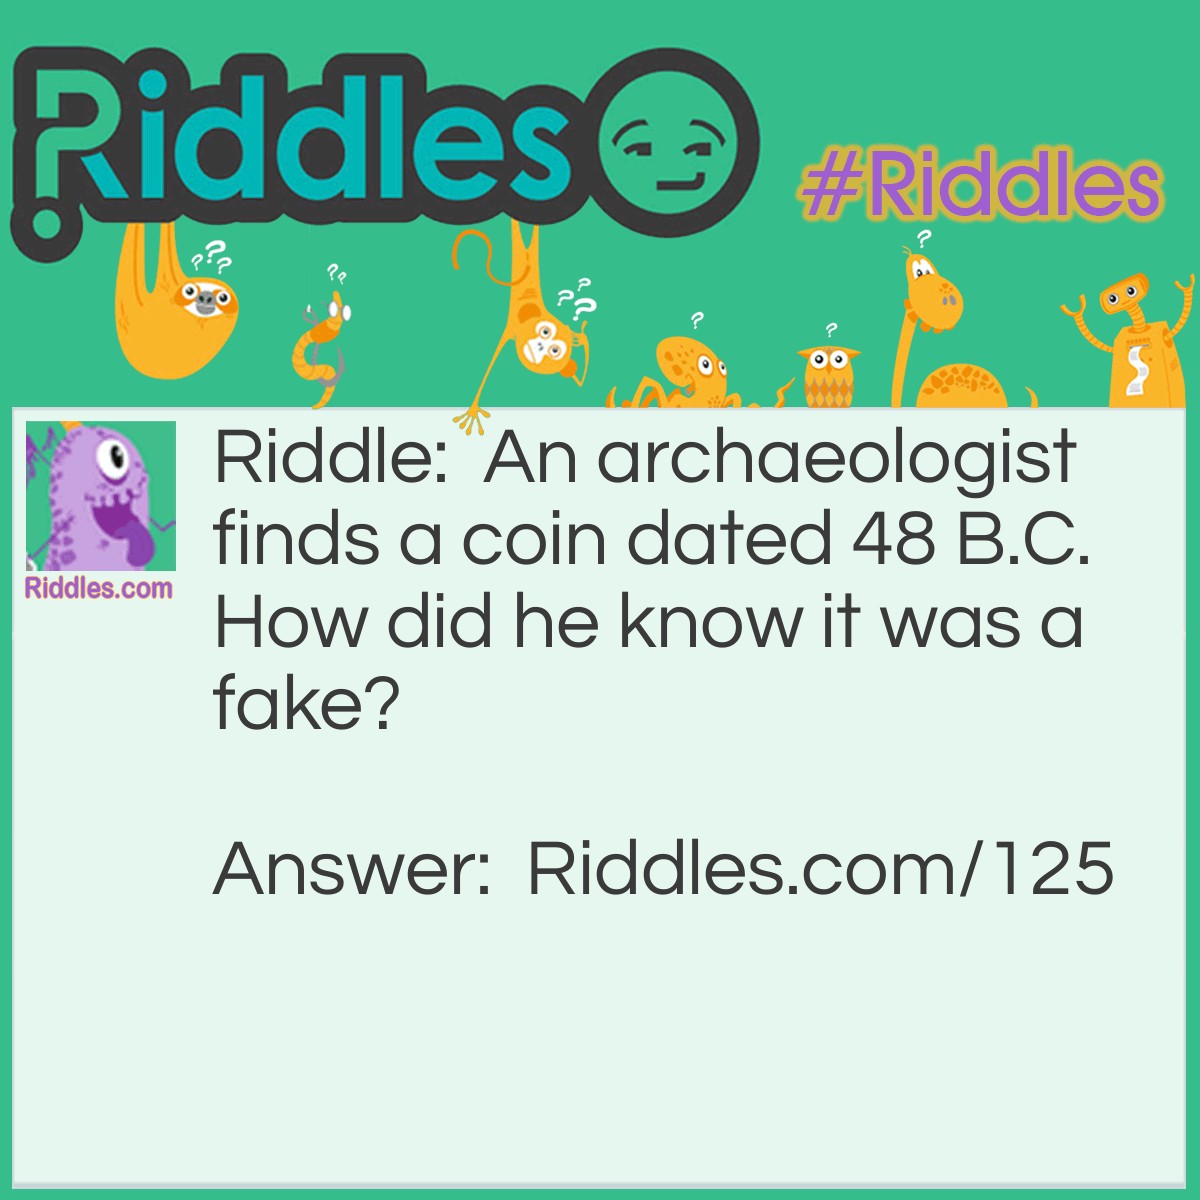 Riddle: An archaeologist finds a coin dated 48 B.C. How did he know it was a fake? Answer: BC is before Christ. Christ was not yet born when the coin would have been made and the date would be impossible.